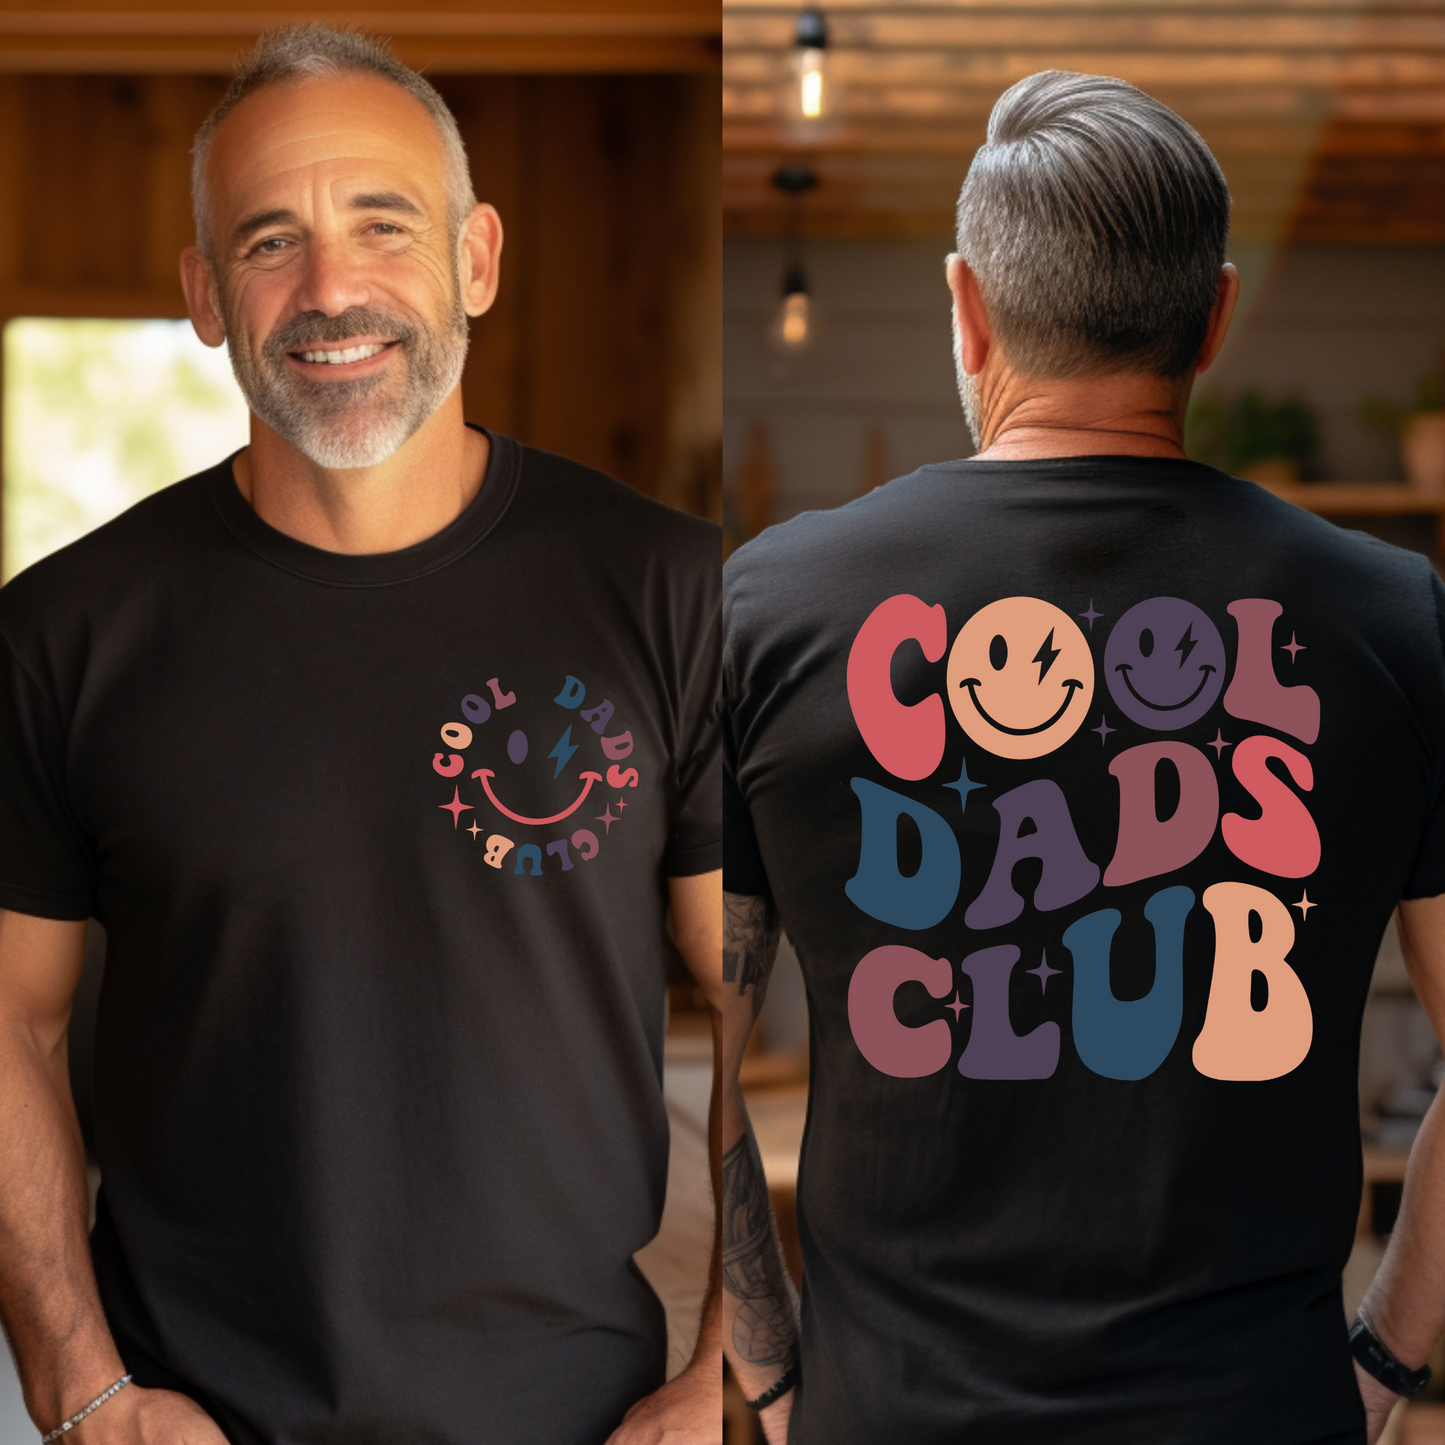 Father's Day Cool Dads Club - Celebrate Fatherhood with Humor